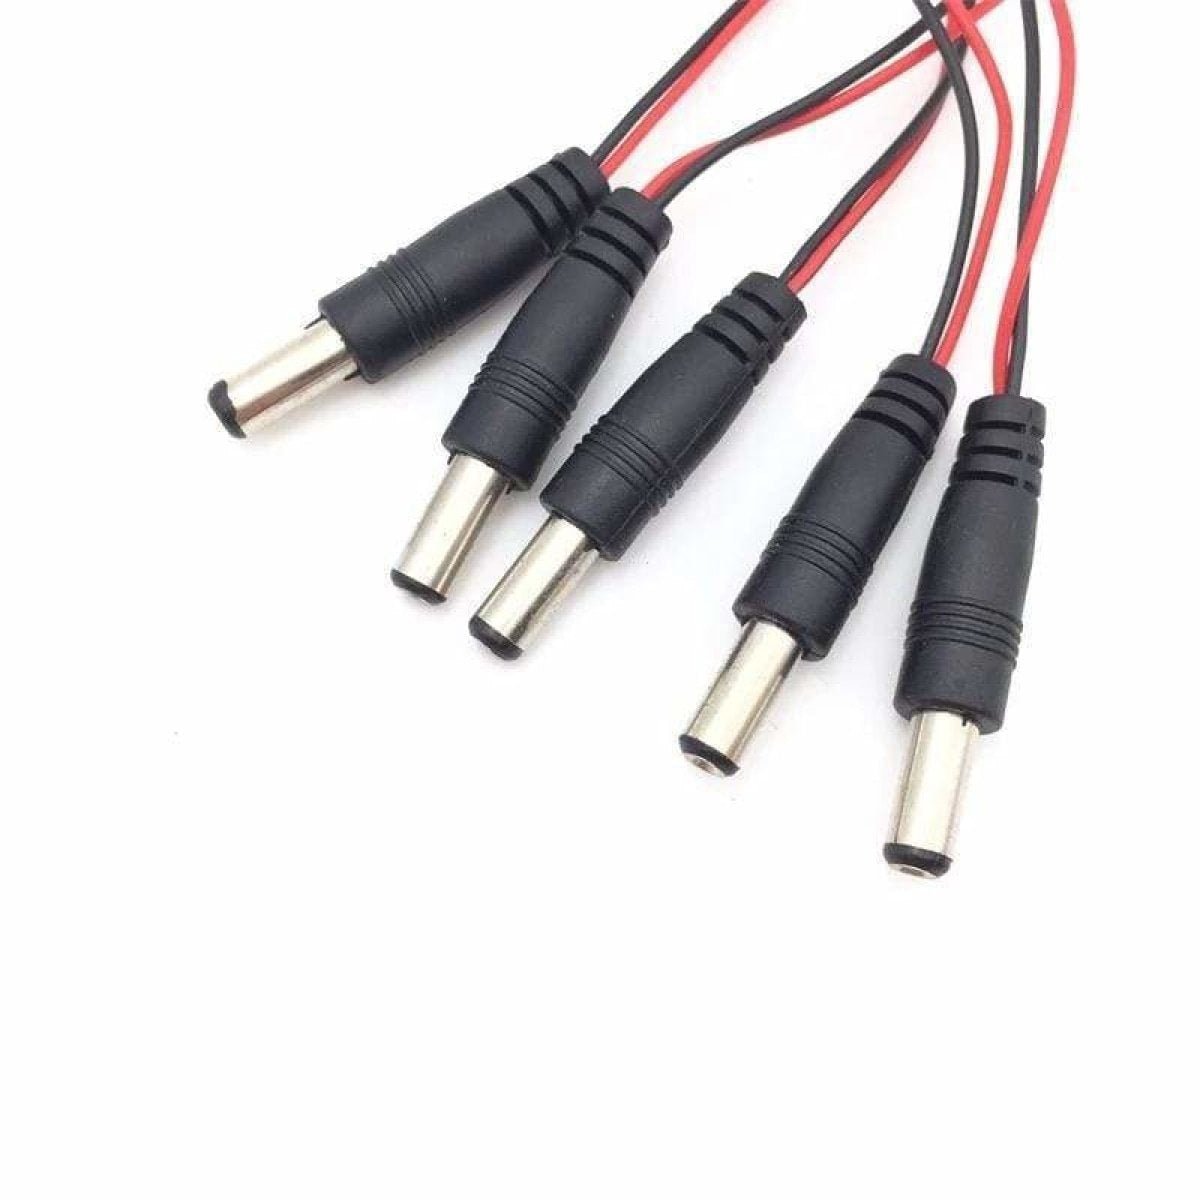 10pcs Snap on 9V Battery Holder Clip 15cm Cable Lead Hard Shell - T Shape 5.5x2.1mm Plug - - Asia Sell